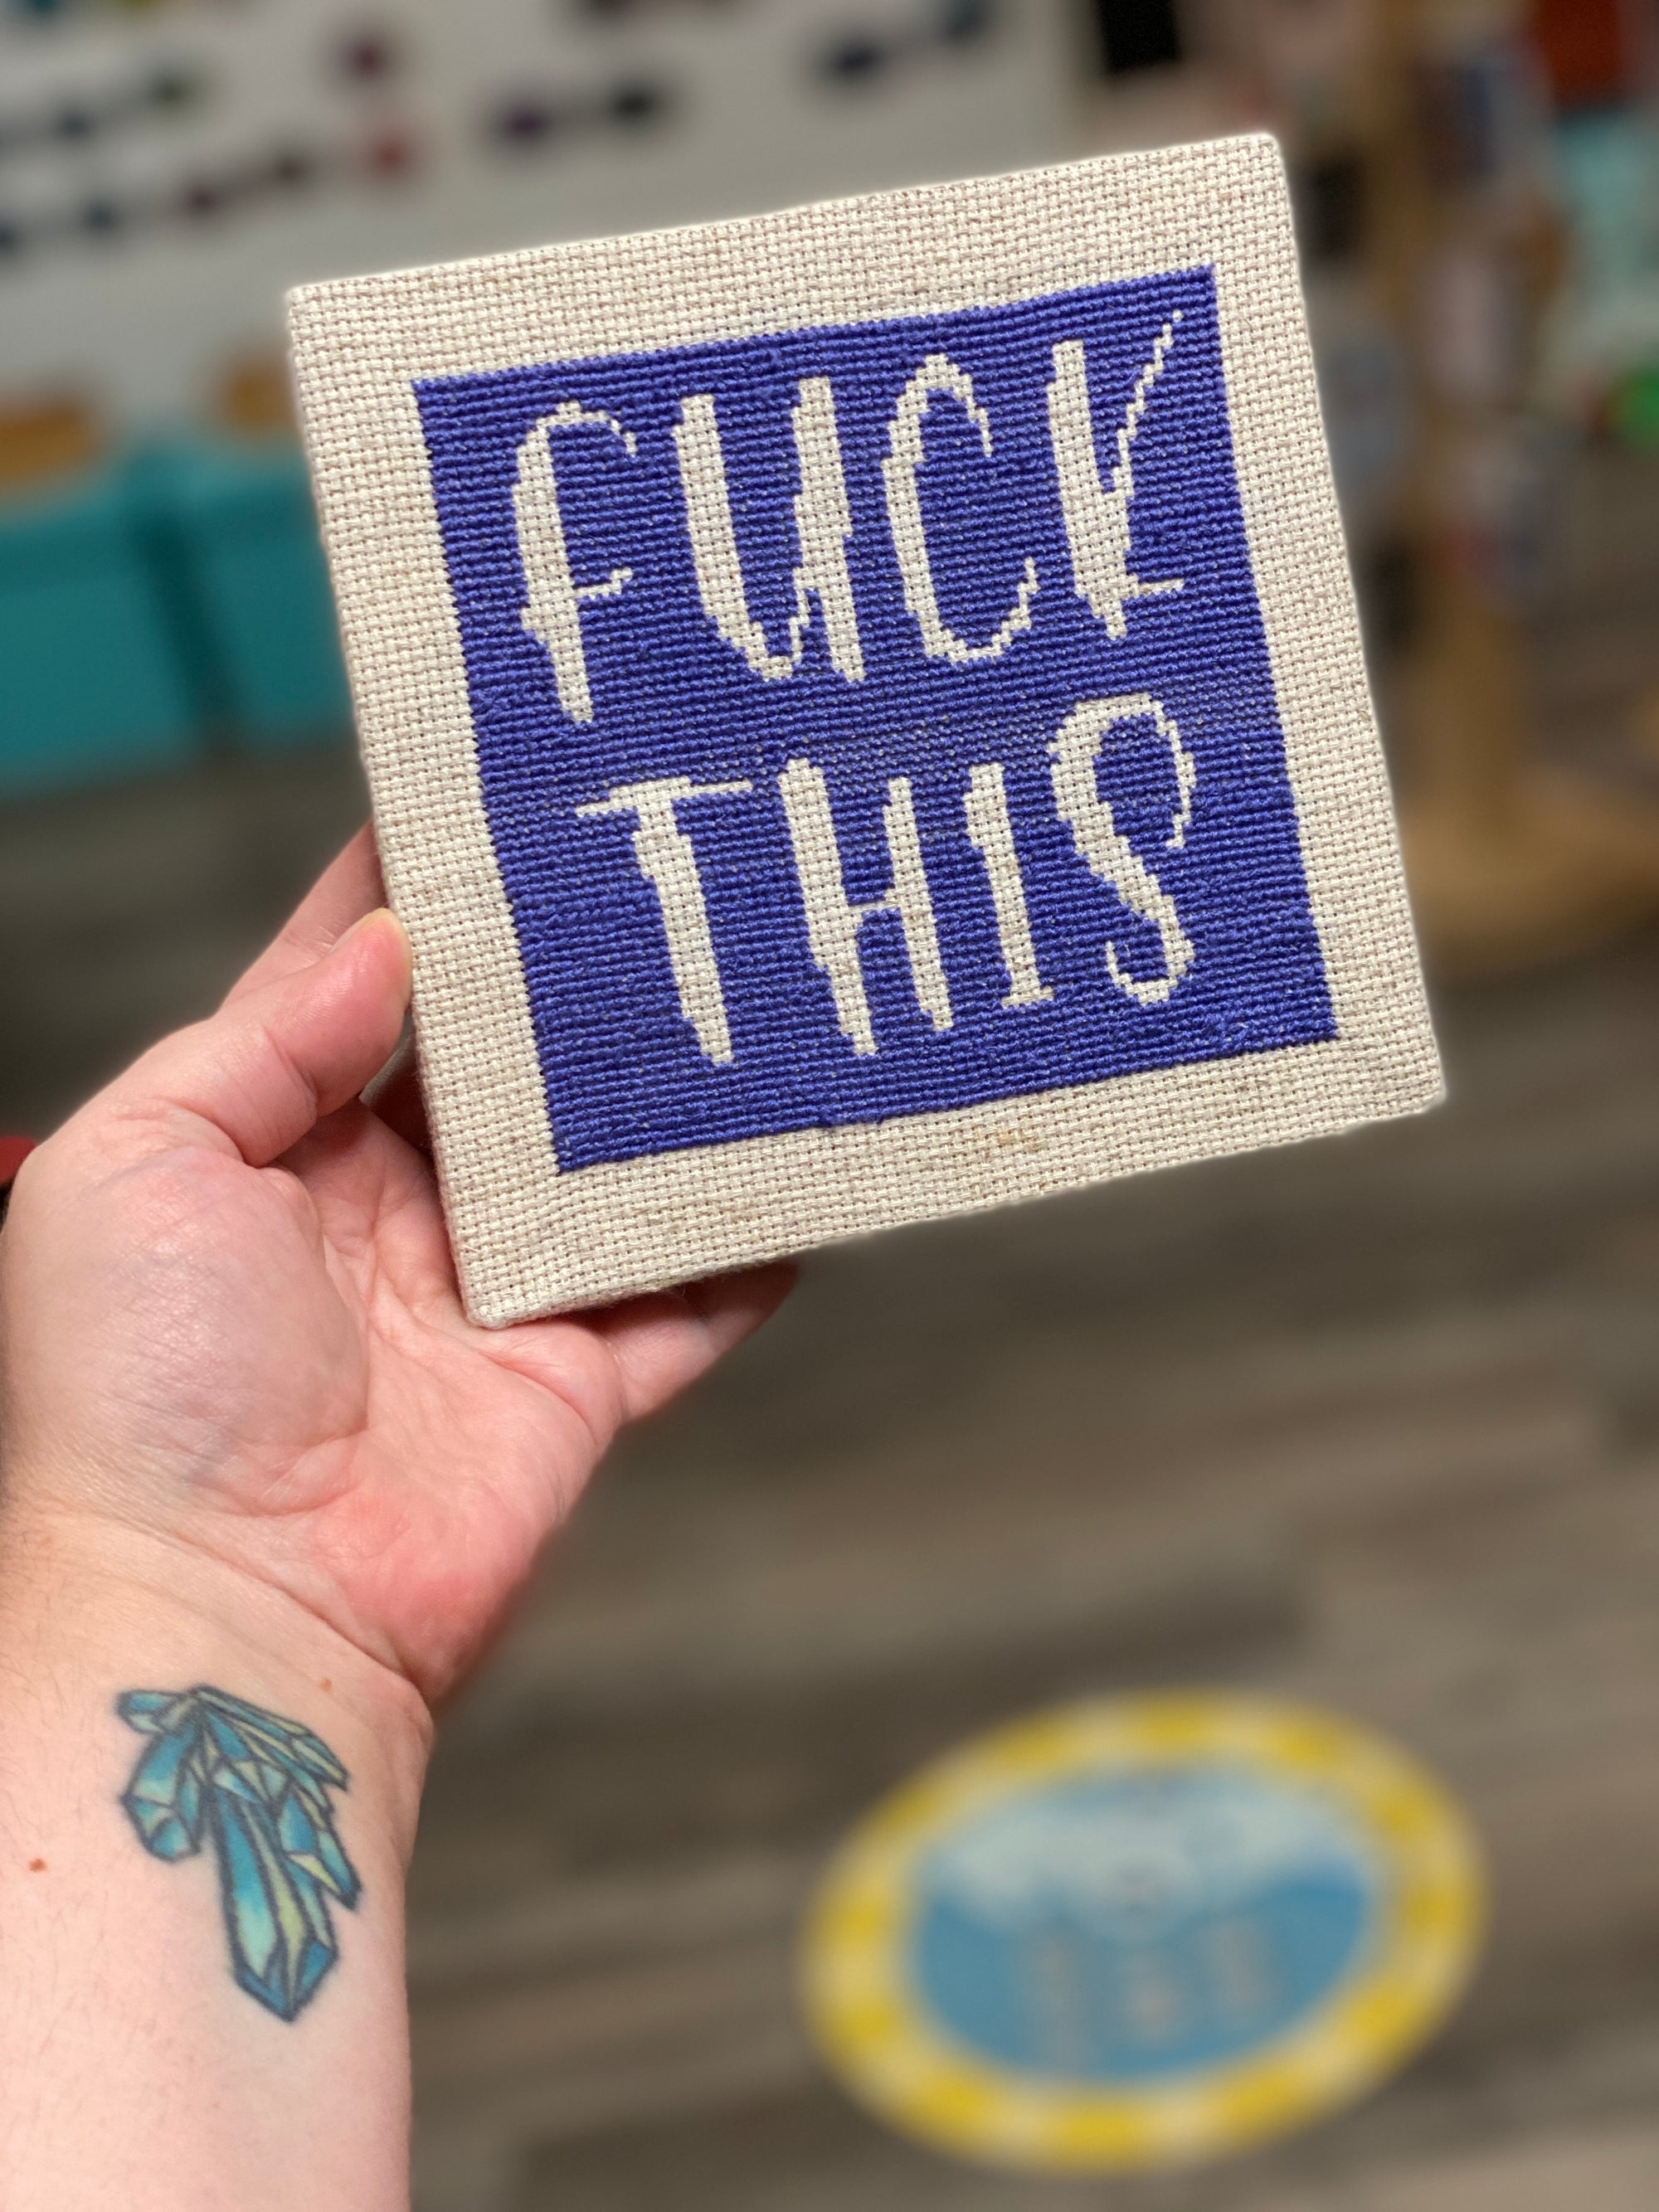 A cross stitch kit that says "Fuck This" Stitched in dark purple on an off-white canvas. 